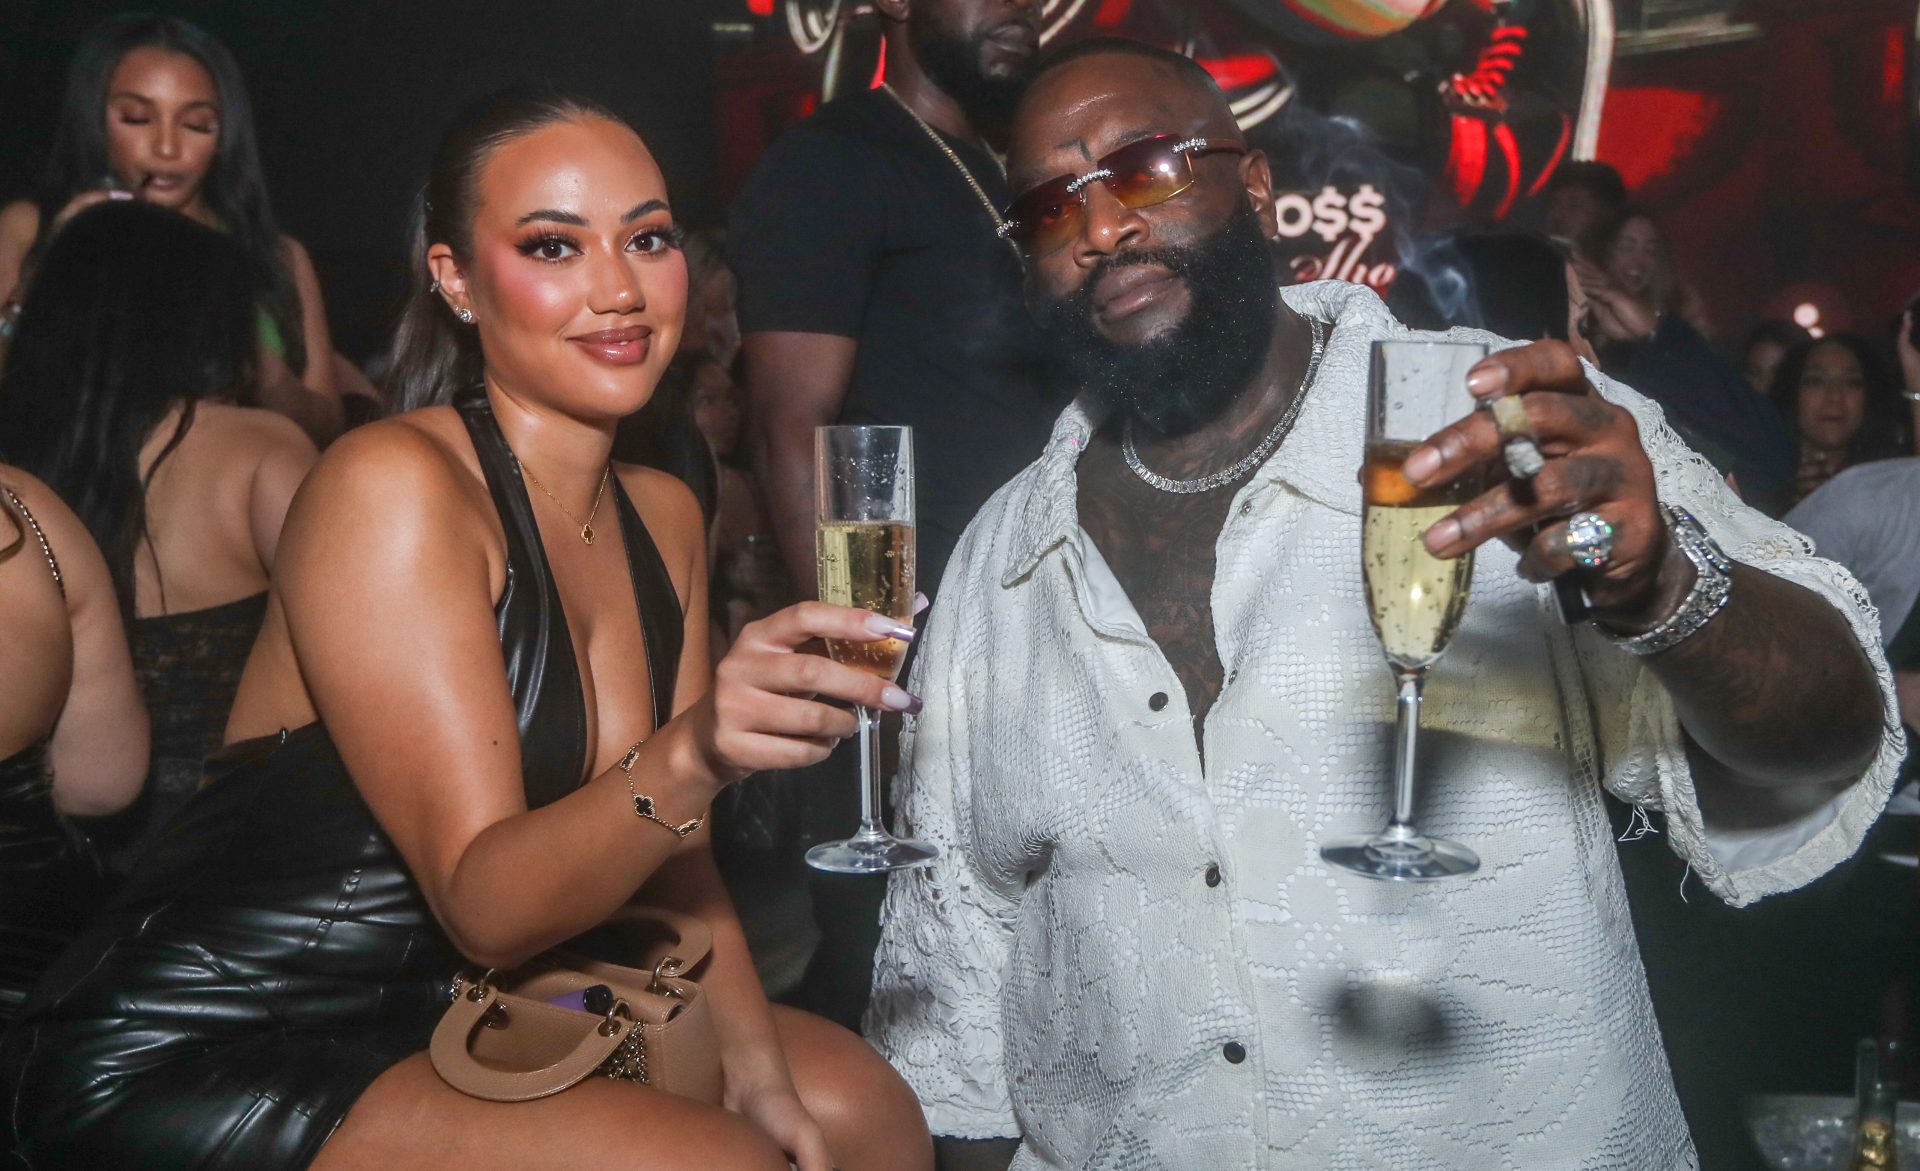 New Boo?  Rick Ross' name appears to be depicted on a woman's neck